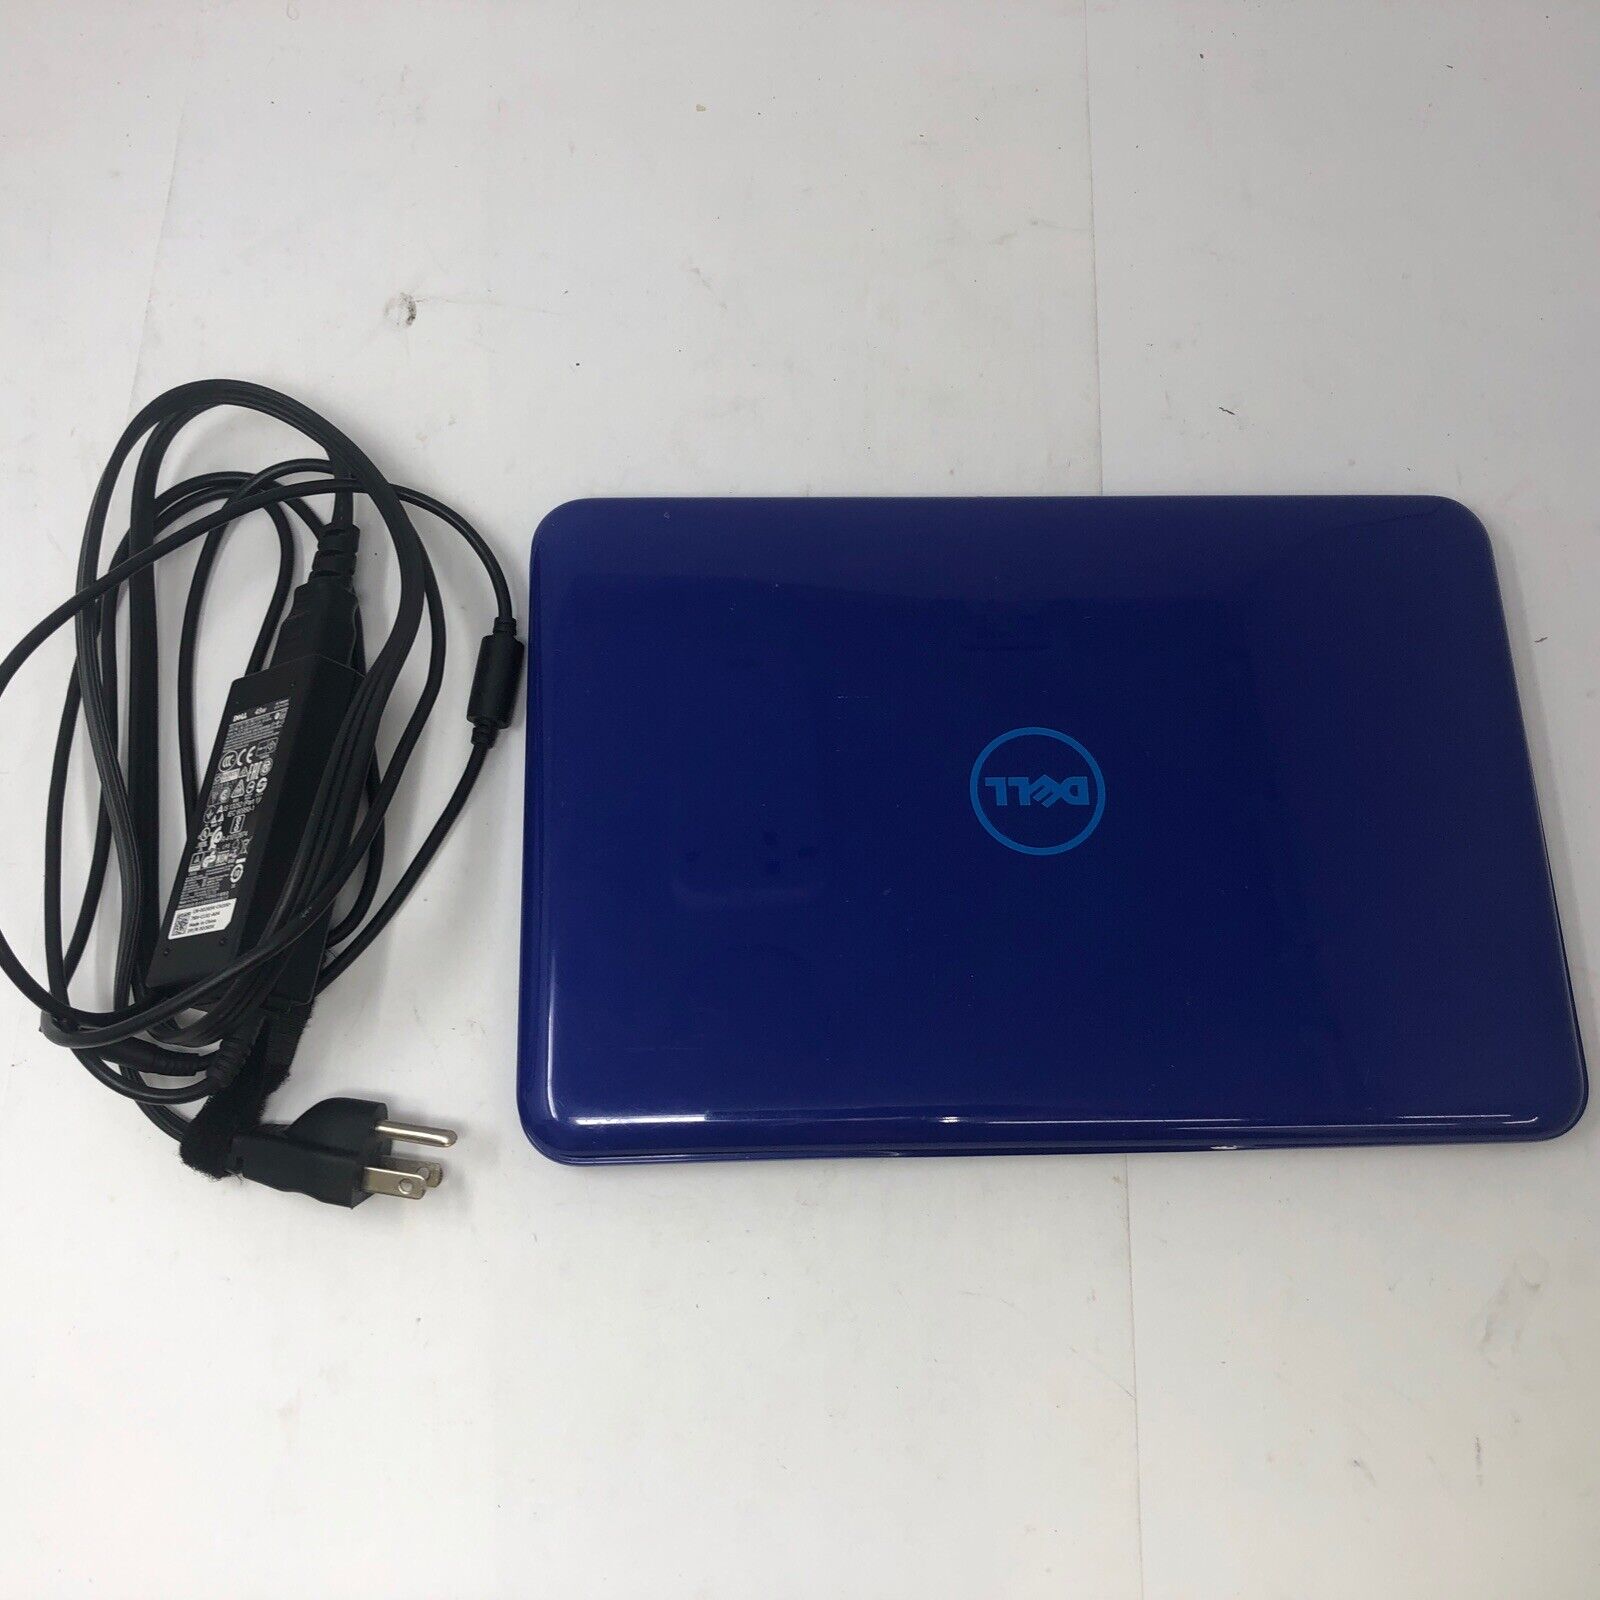 DELL INSPIRON 11 P24T LAPTOP WIN10 4GB INTEL CEL N3060 BLUE 2017 - FOR PARTS